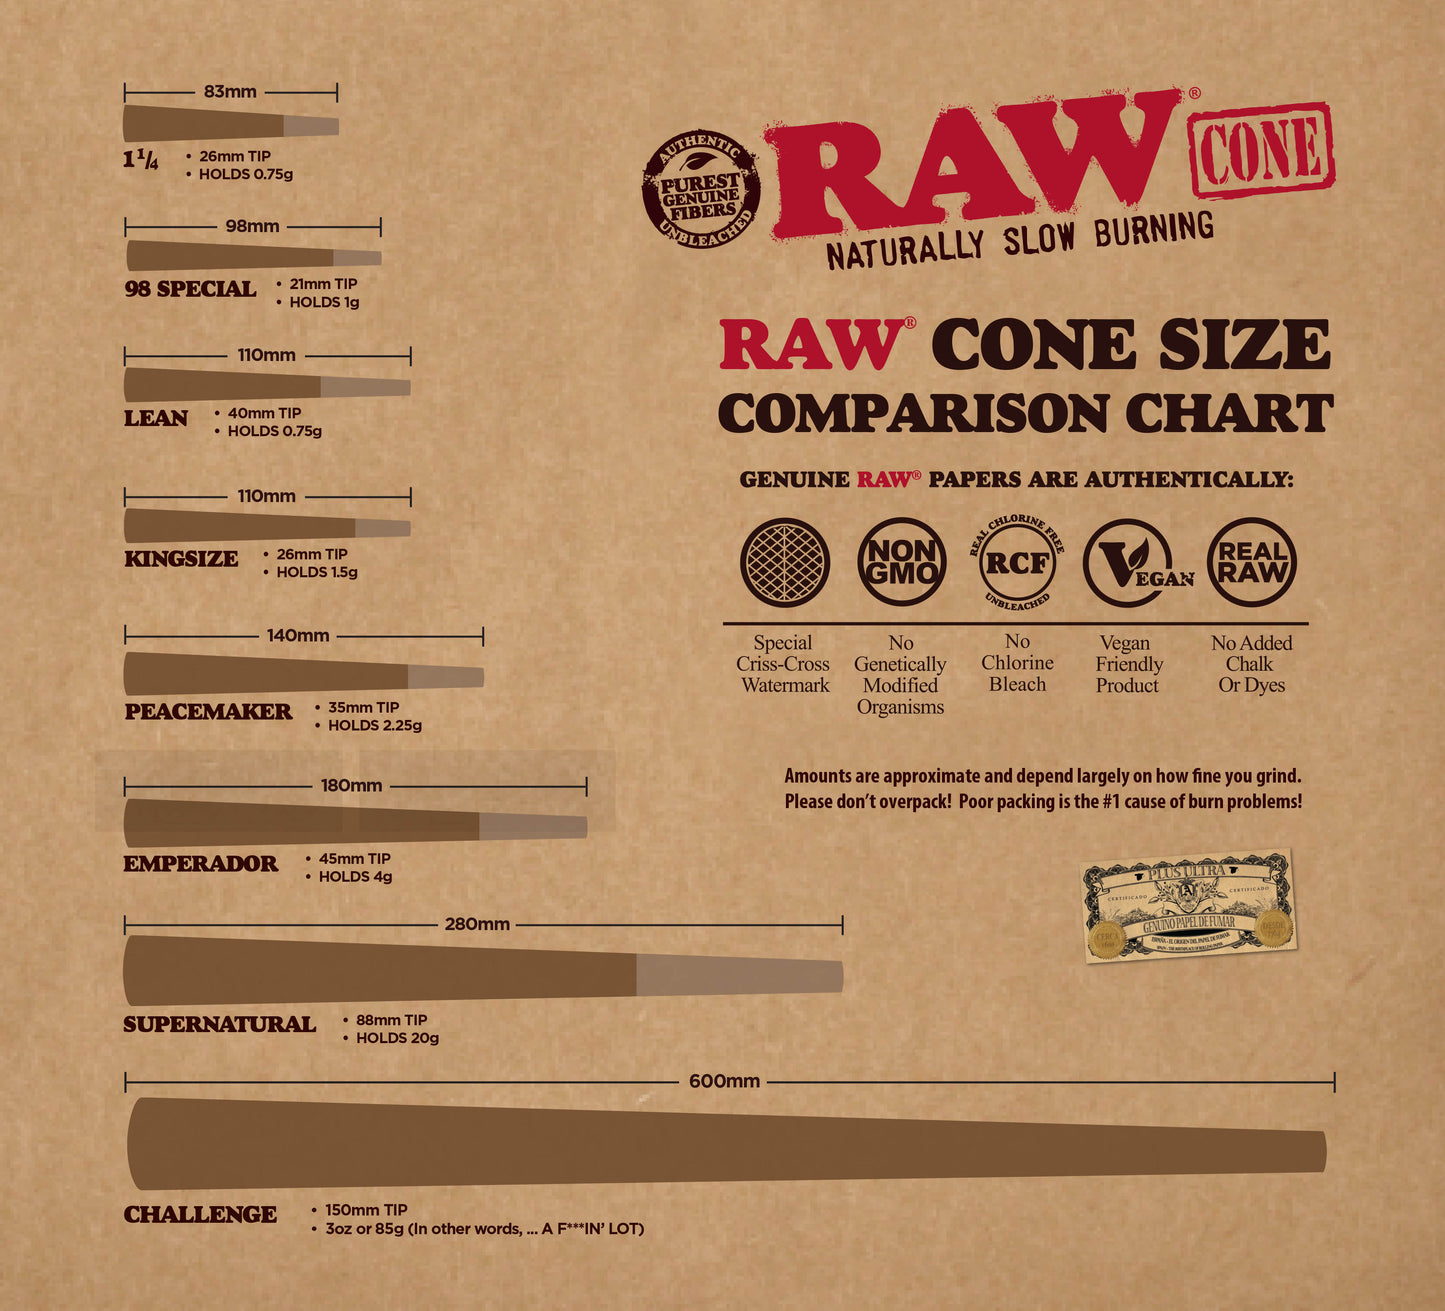 RAW Organic King Size Pre-Rolled Cones 32PK